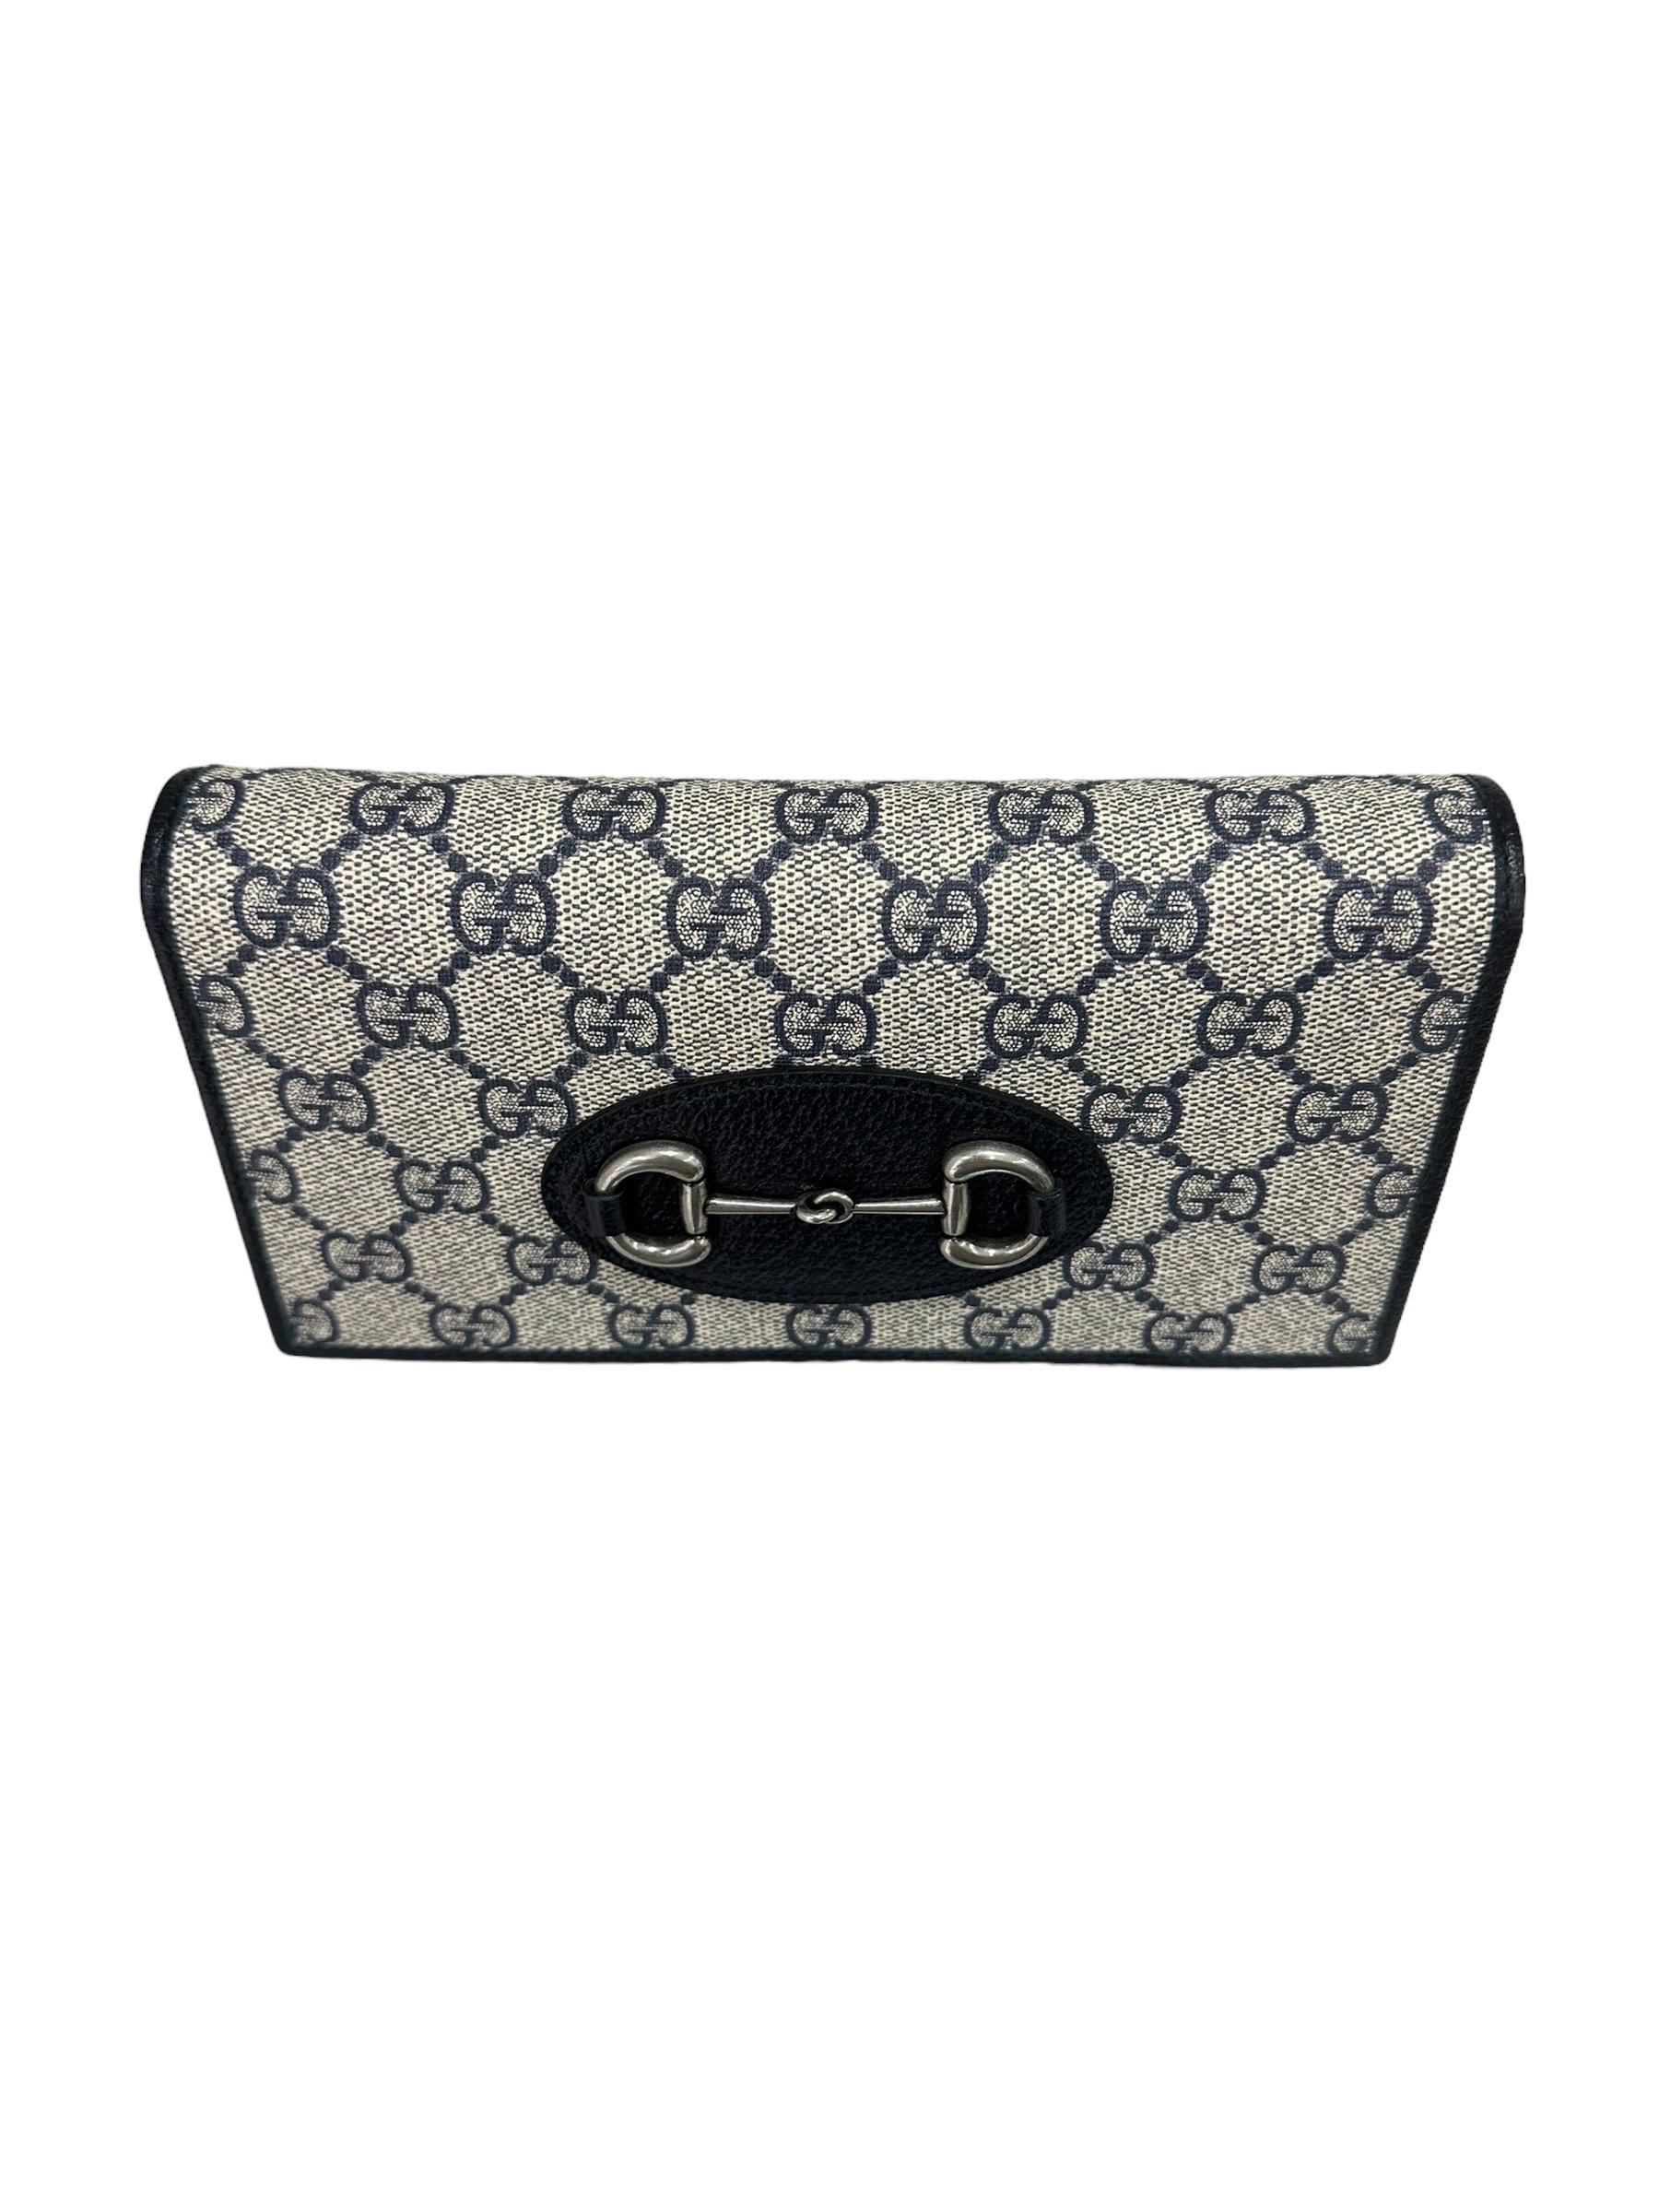 Gucci Horsebit GG Wallet On Chain In Excellent Condition For Sale In Torre Del Greco, IT